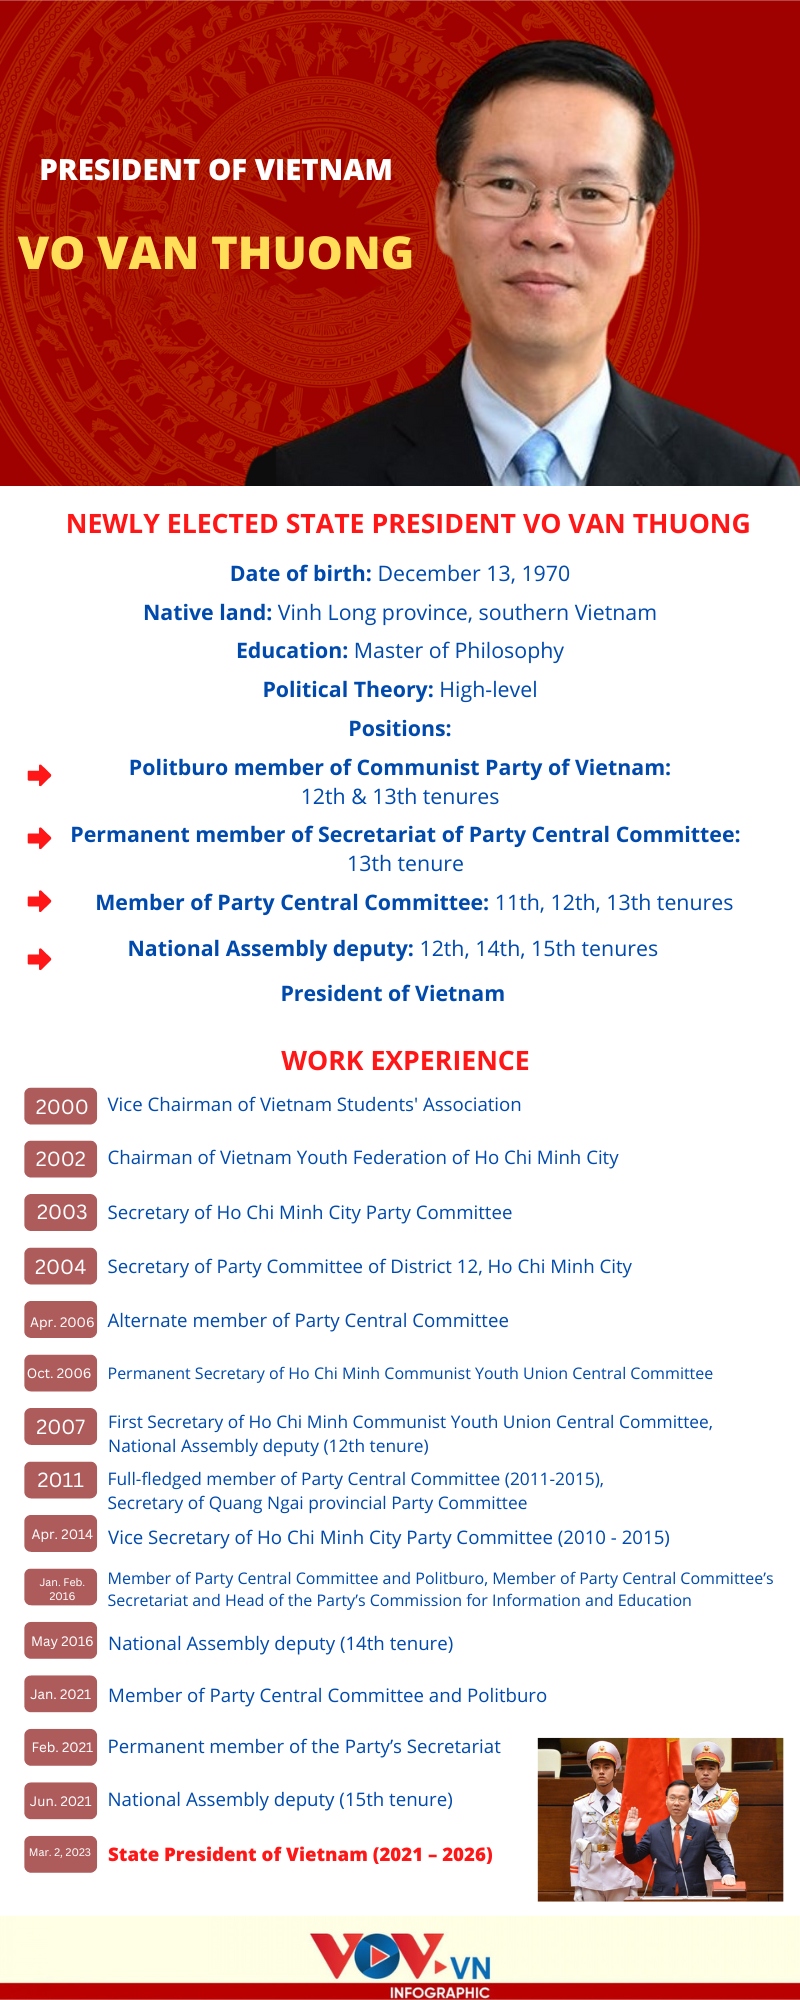 profile of newly elected president of vietnam vo van thuong picture 1